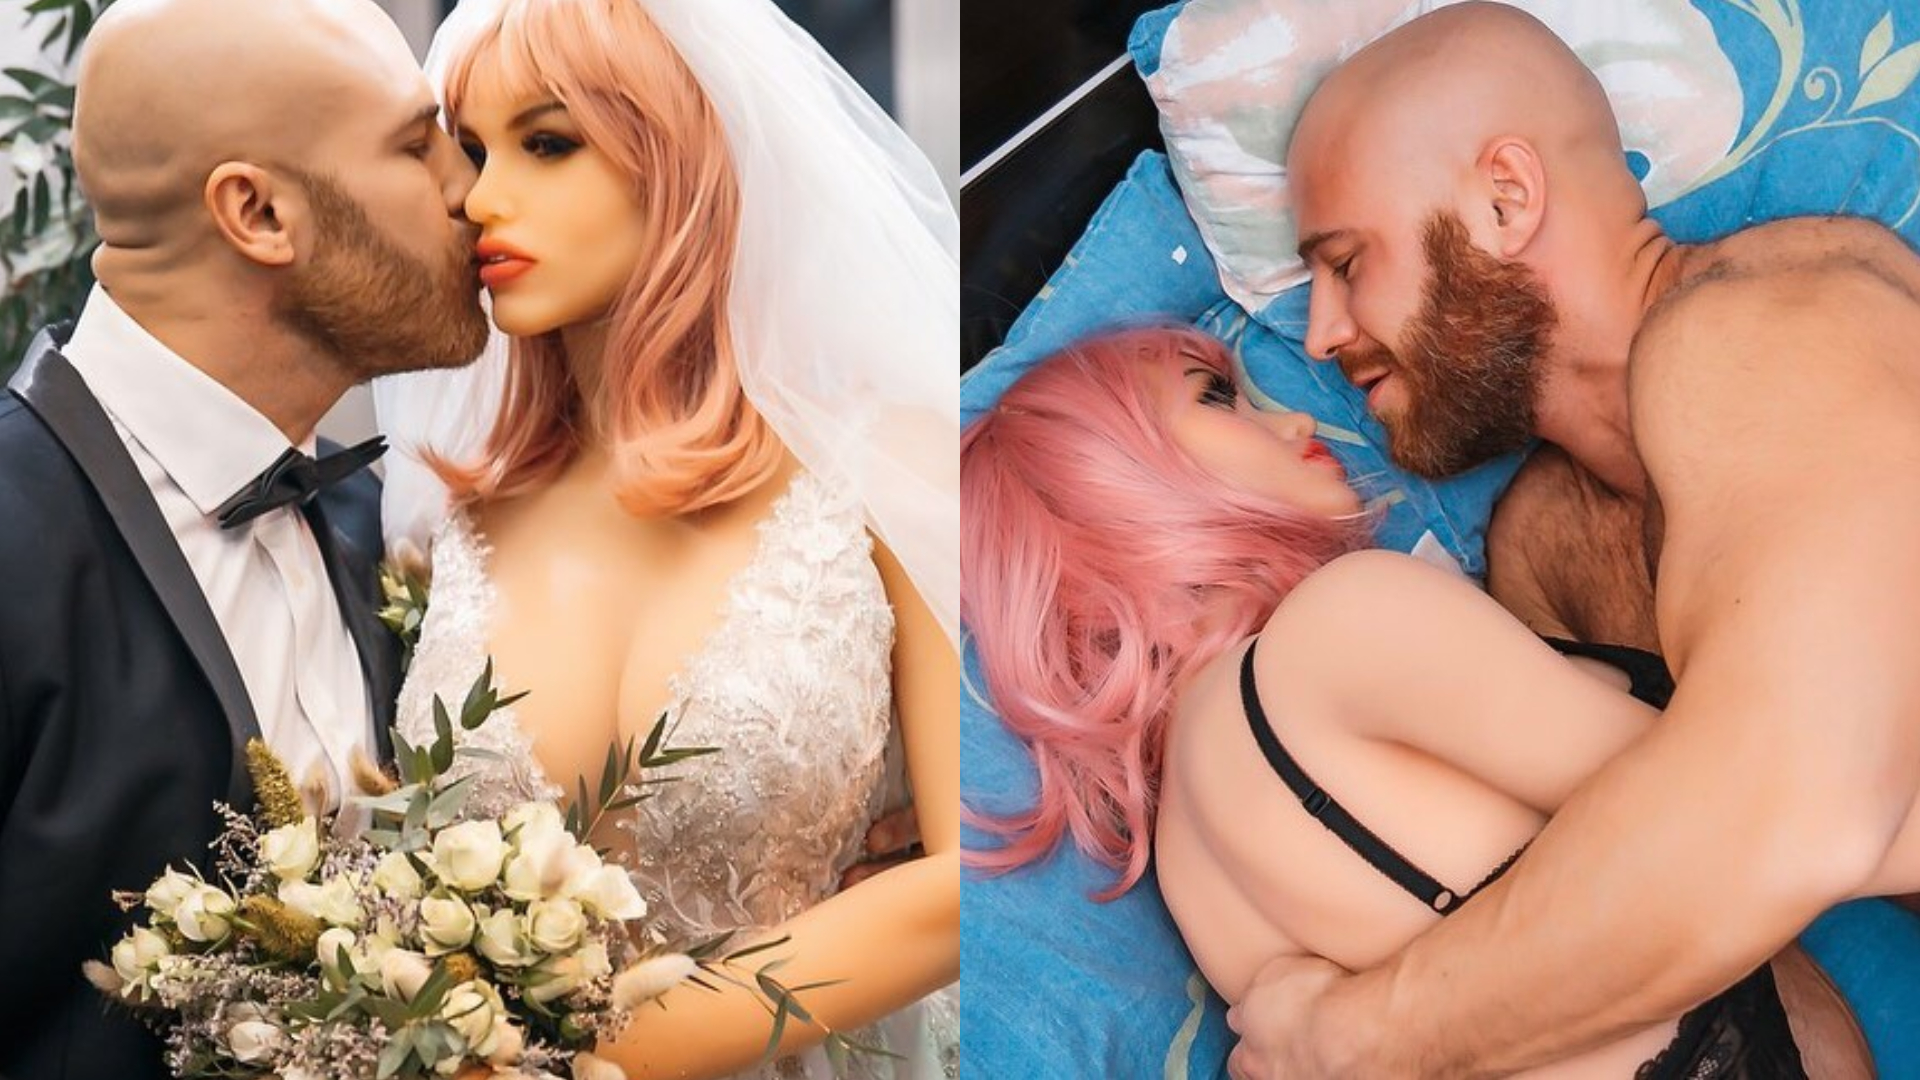 Meet the Man Who Married His Sex Doll picture